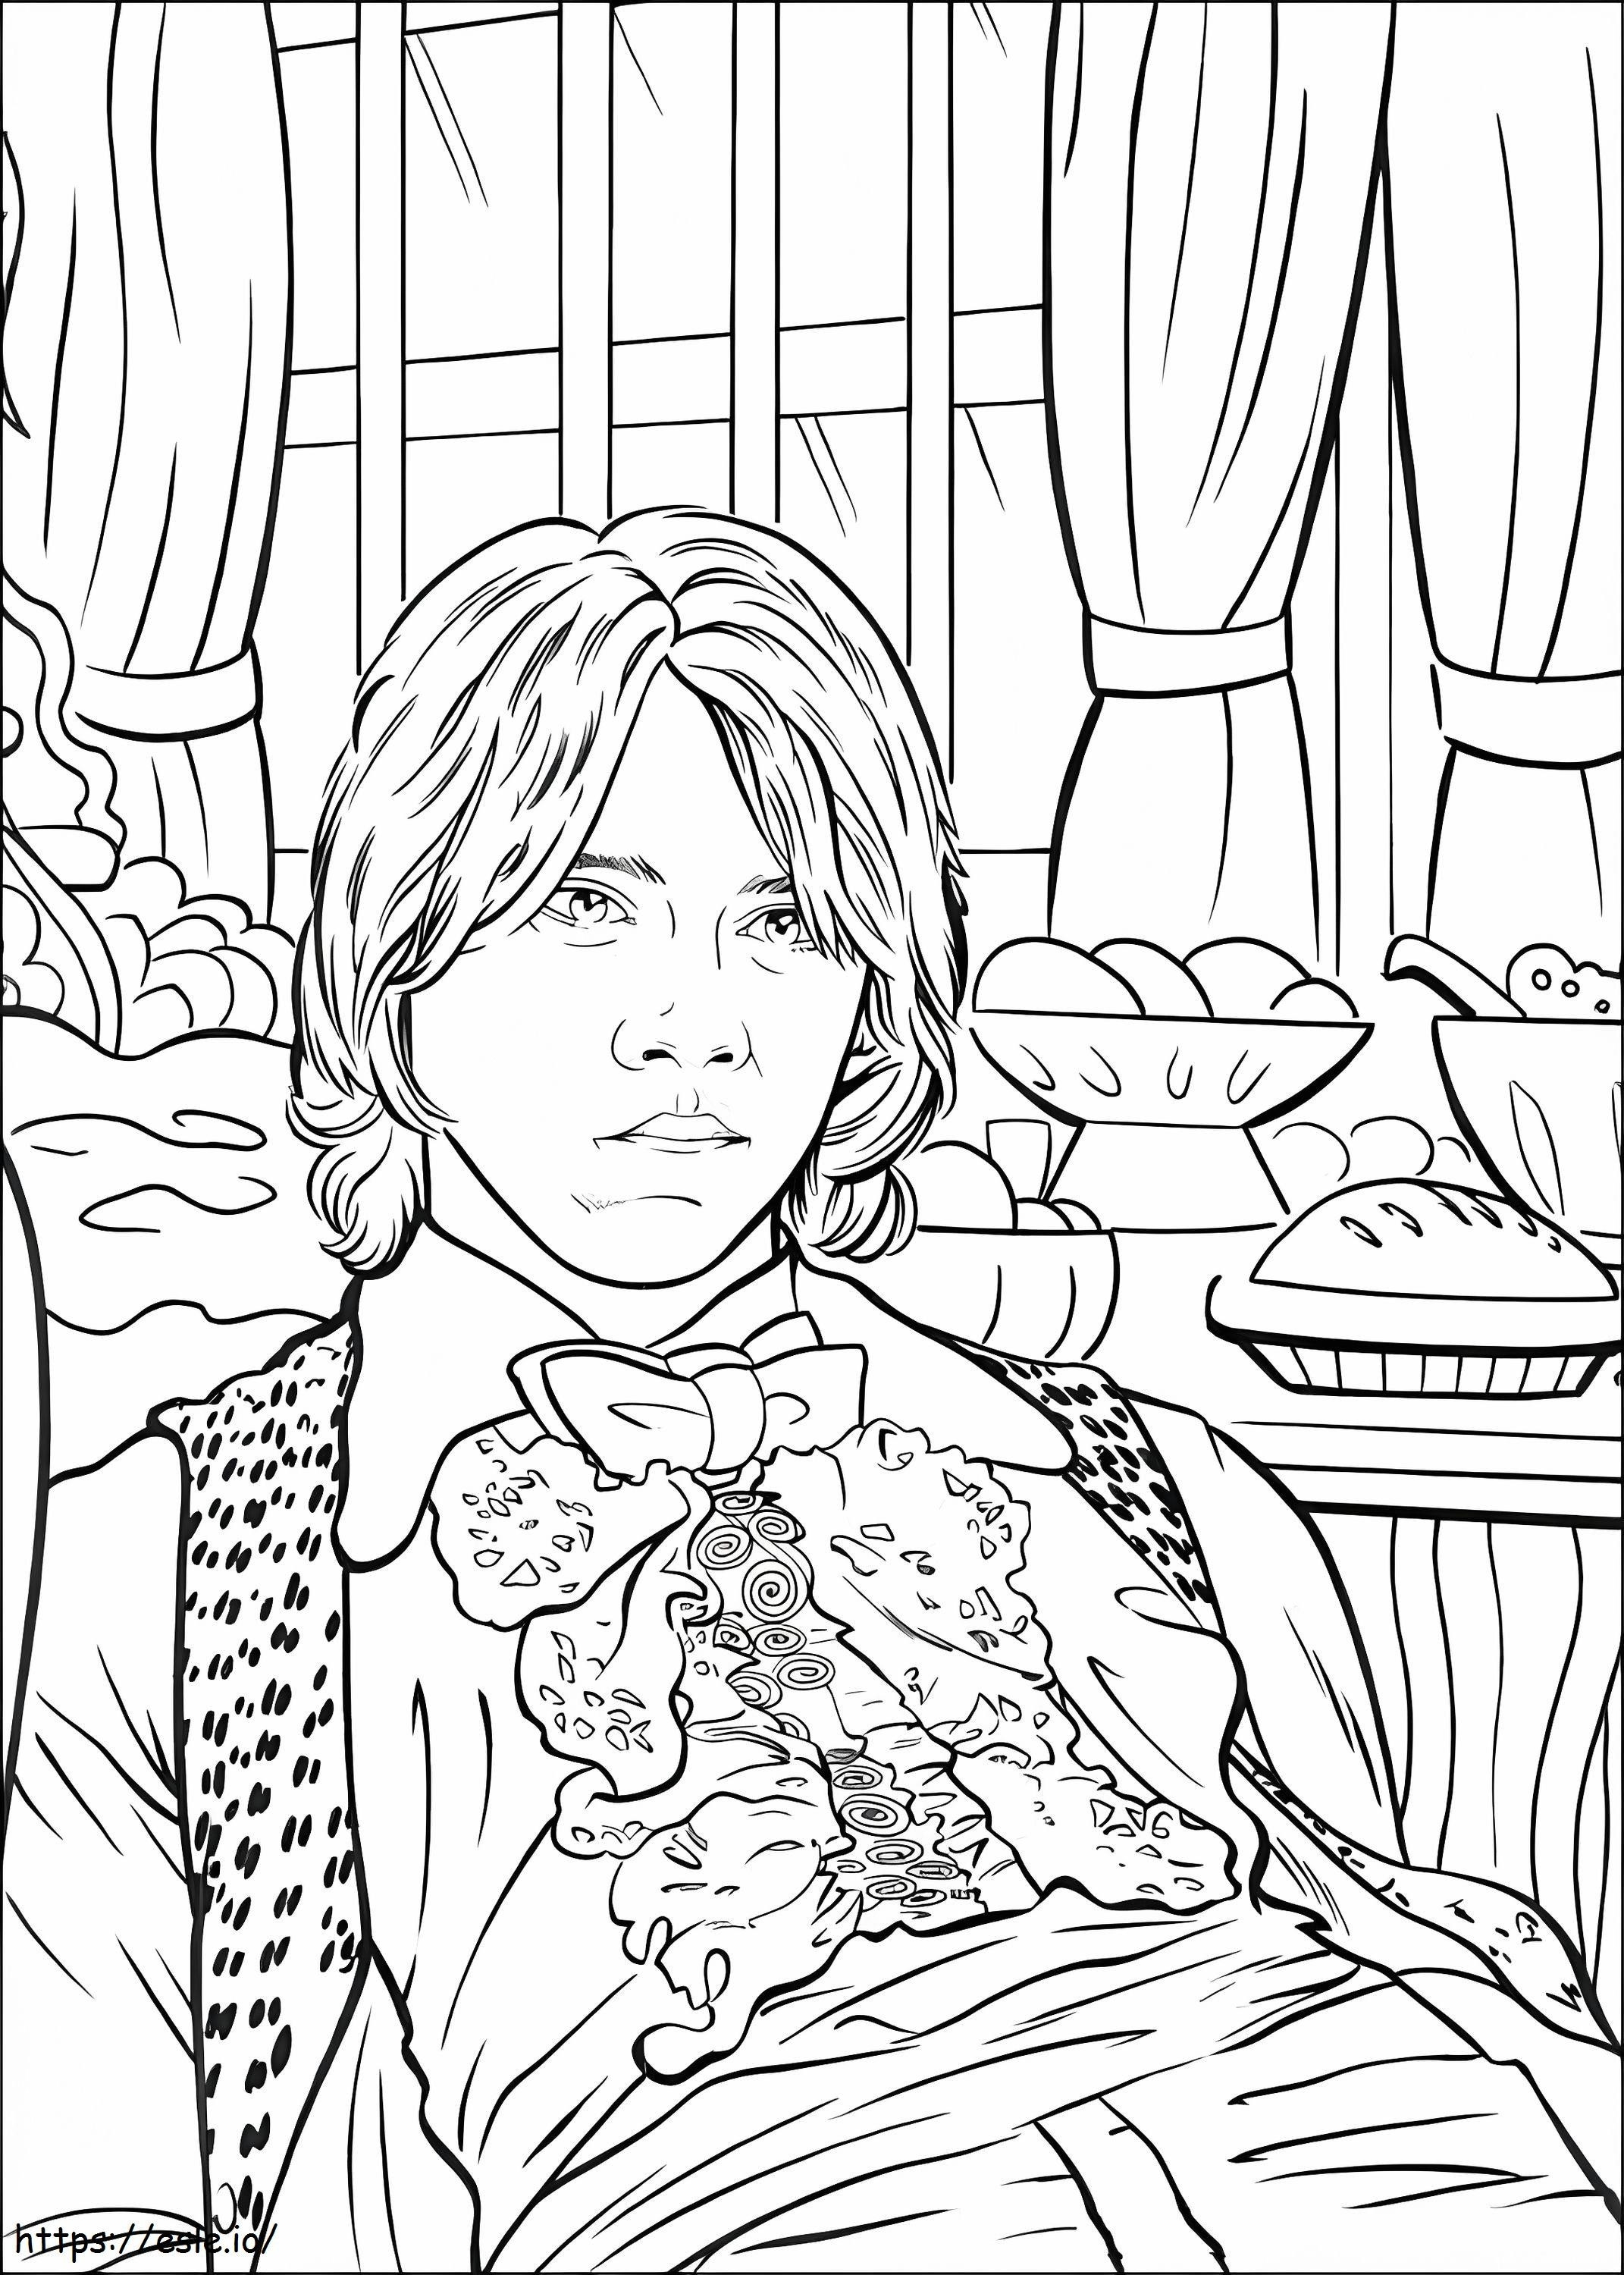 Amazing Ron Weasley coloring page